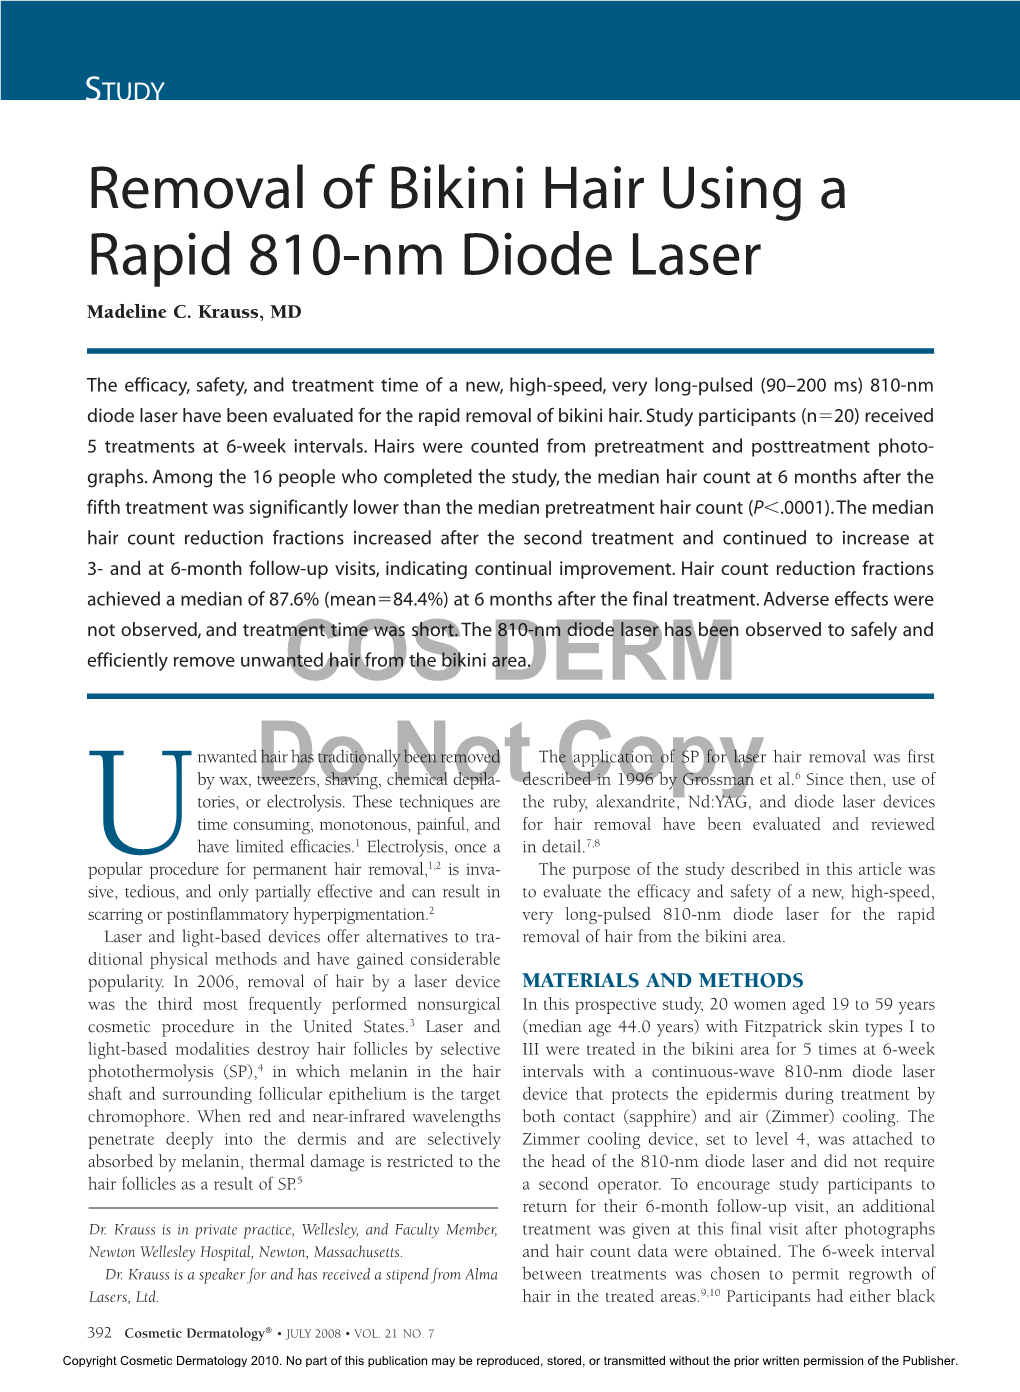 Removal of Bikini Hair Using a Rapid 810-Nm Diode Laser Madeline C